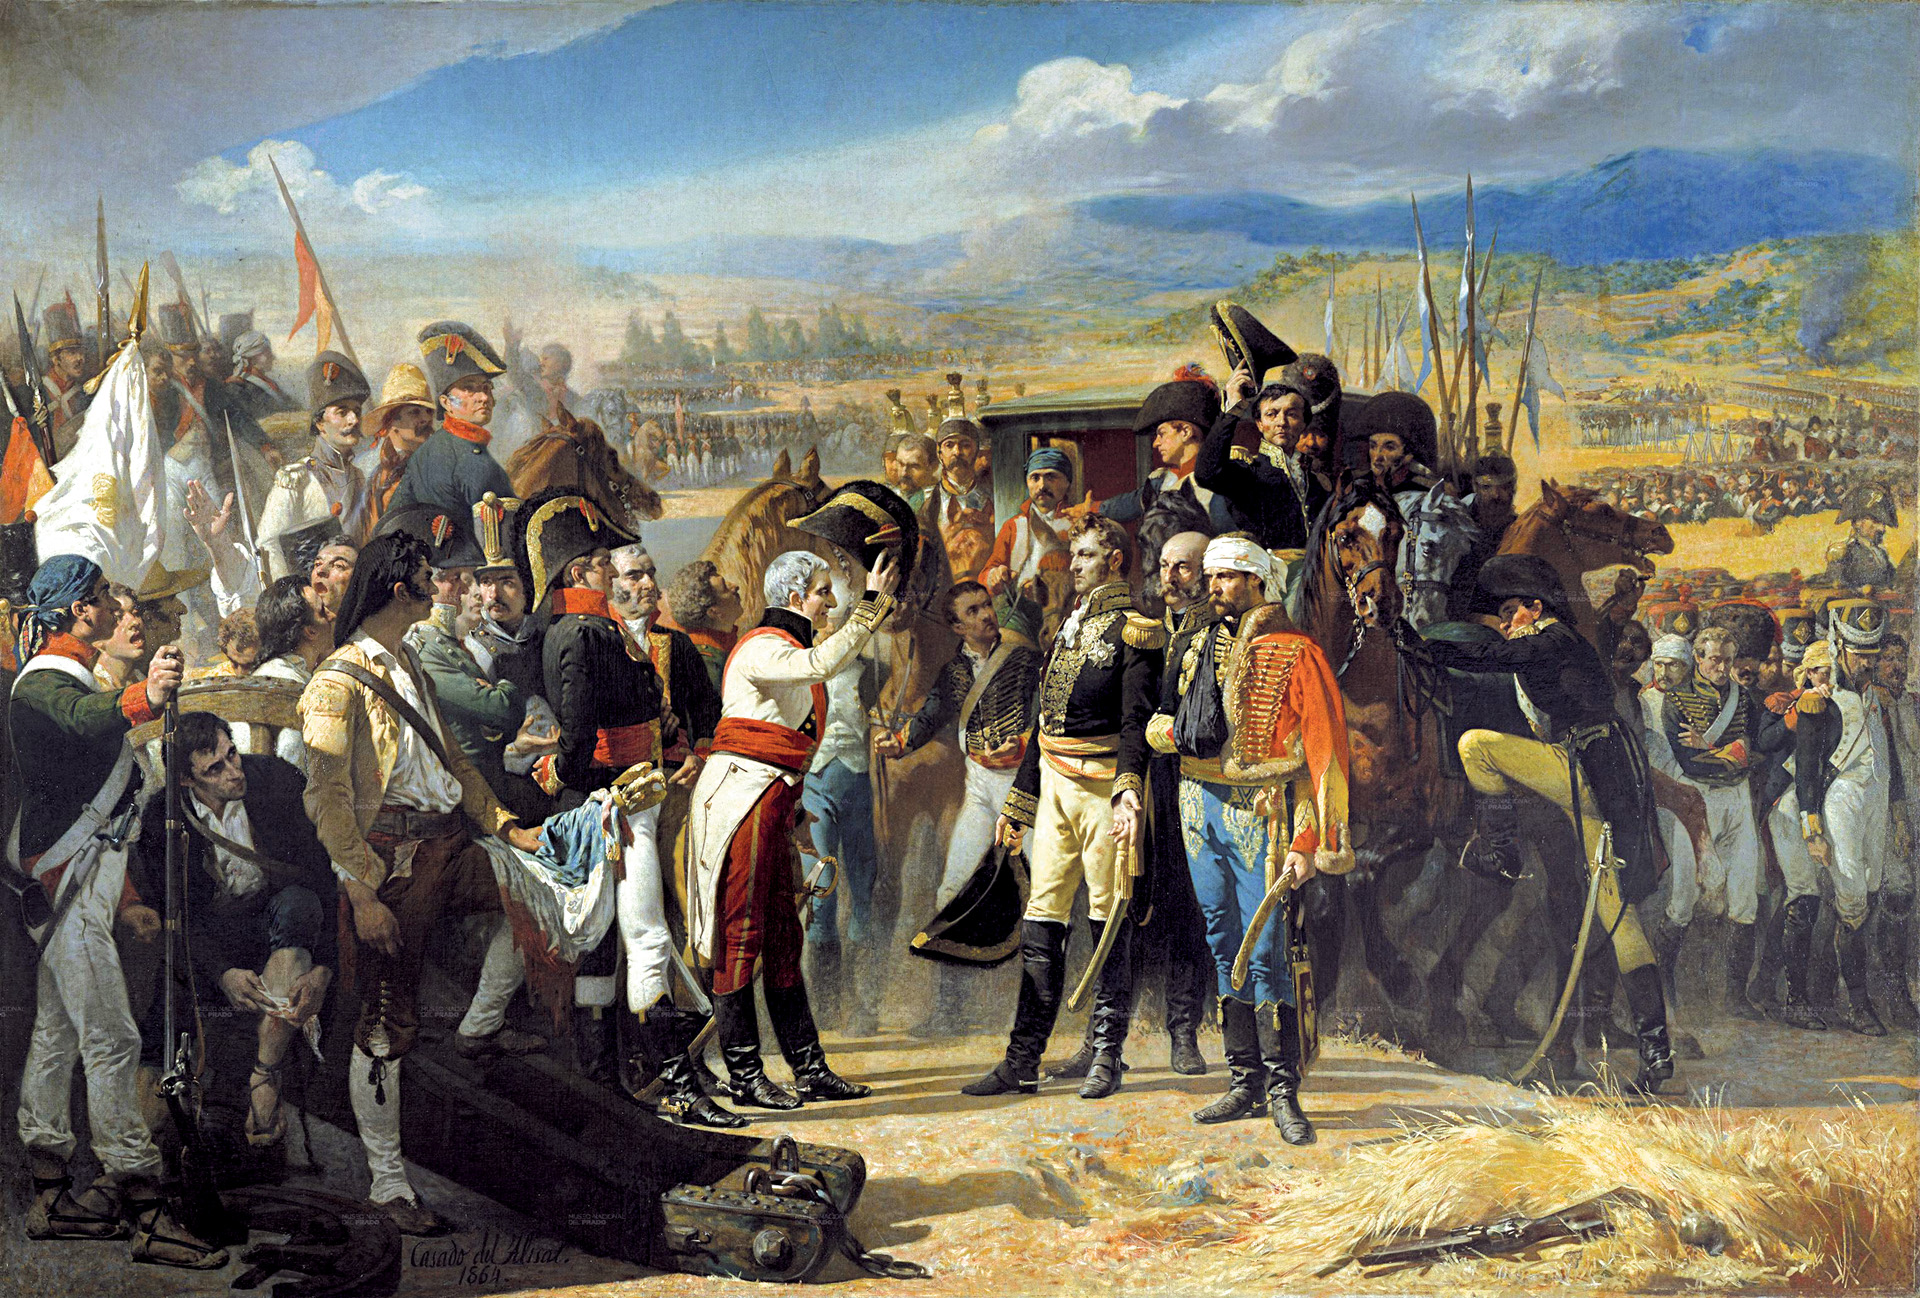 The Battle of Bailén in July 1808, in which the Spanish forced the surrender of 20,000 French troops, marked the first major defeat of Napoleon’s Grand Armée. In response, Napoleon personally oversaw the reconquest of Spain.